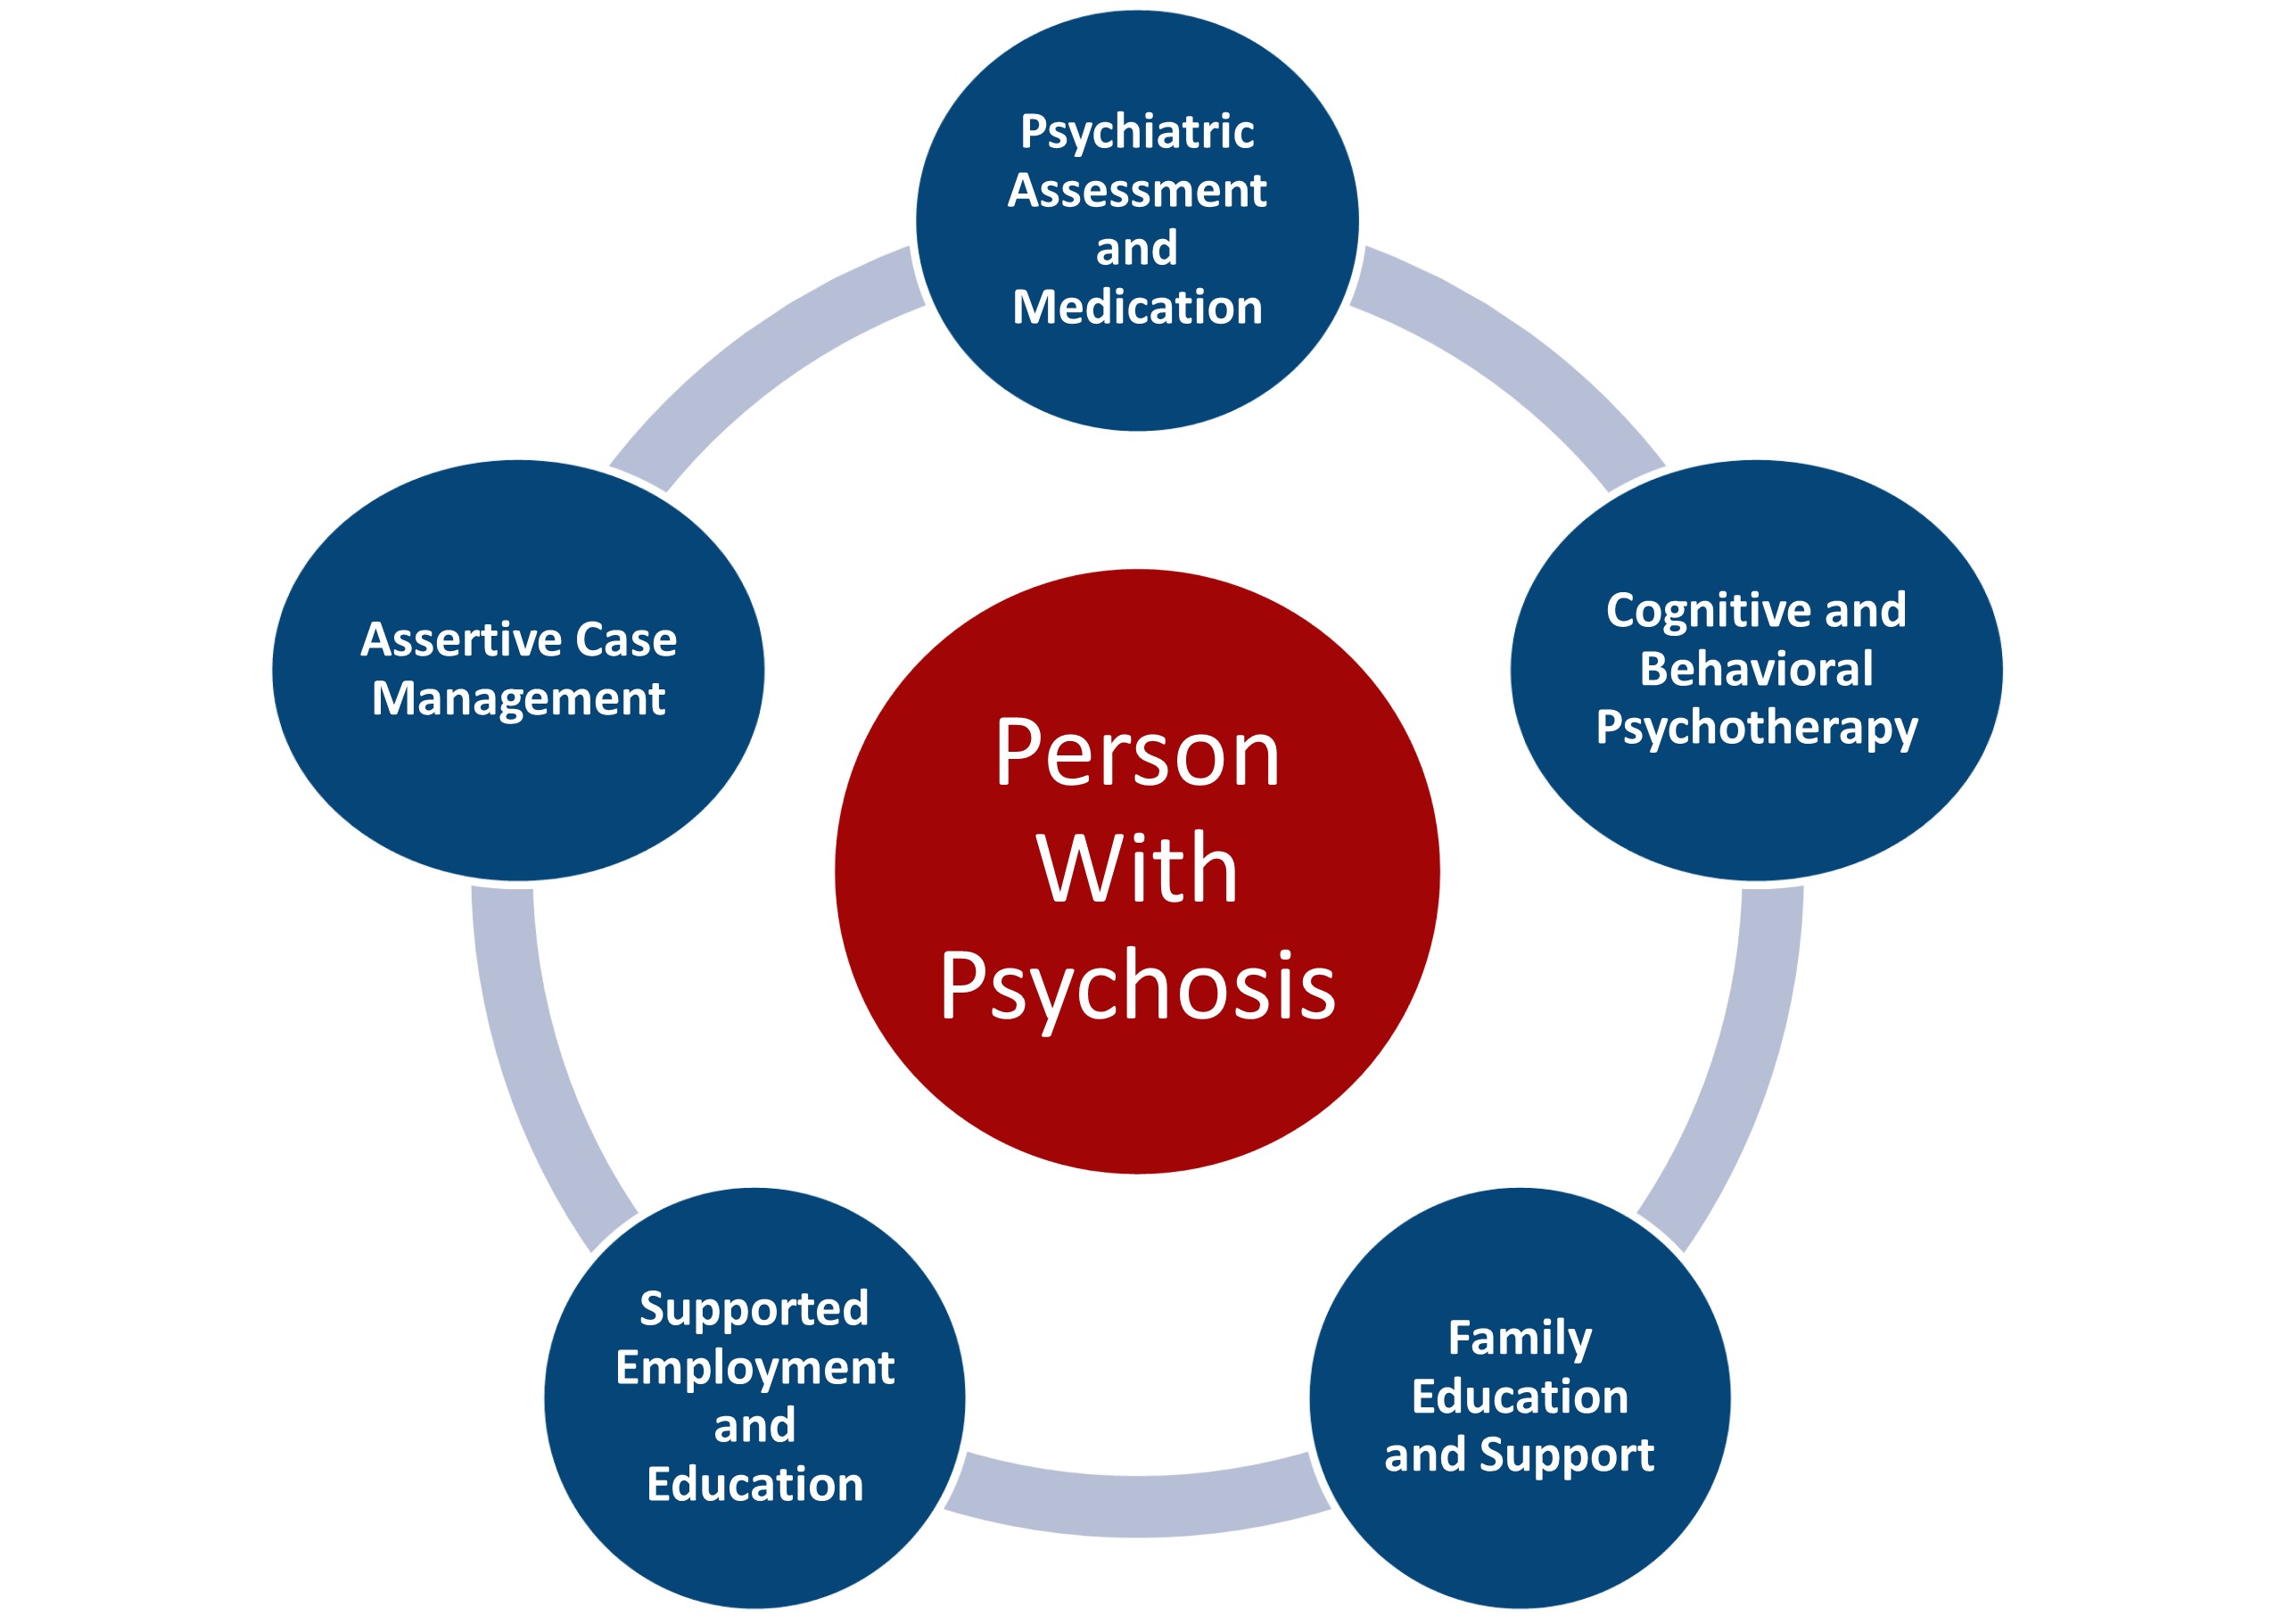 Five components of the coordinated specialty care model: Psychiatric assessment and medication, cognitive and behavioral psychotherapy, family education and support, Supported employment and education, and assertive case management.